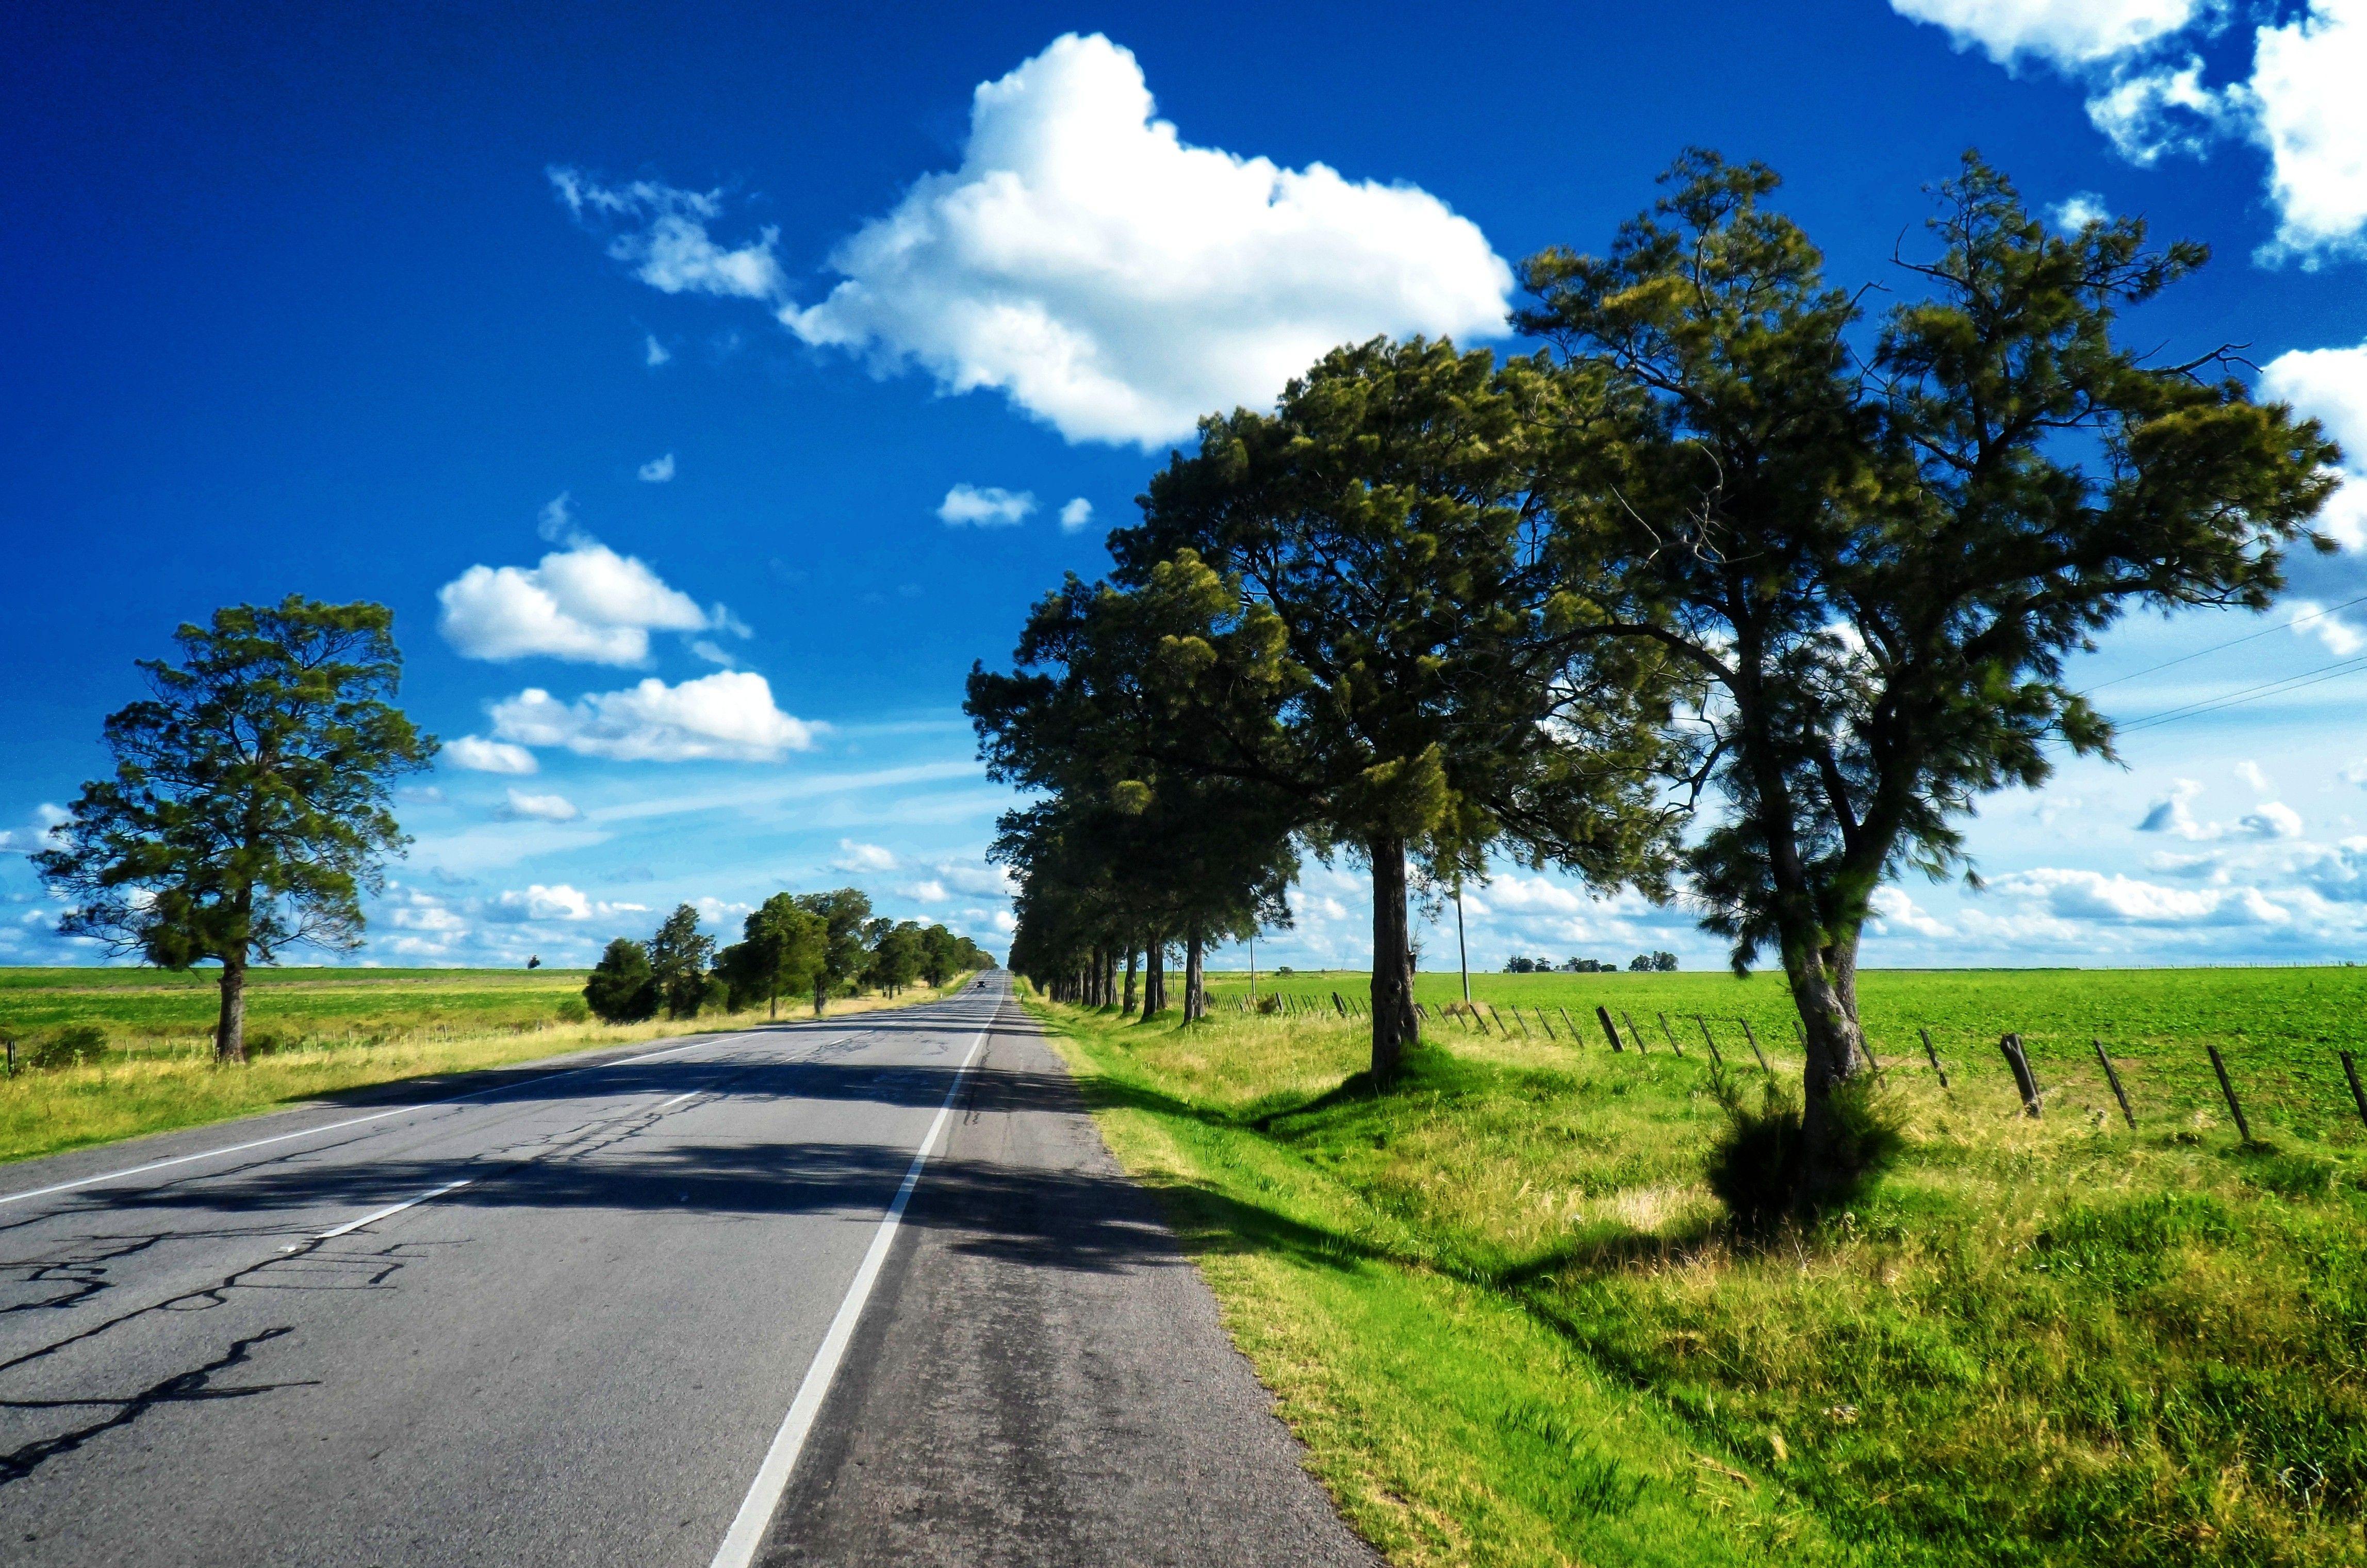 photographer uruguay route 66 road landscape wallpaper and background